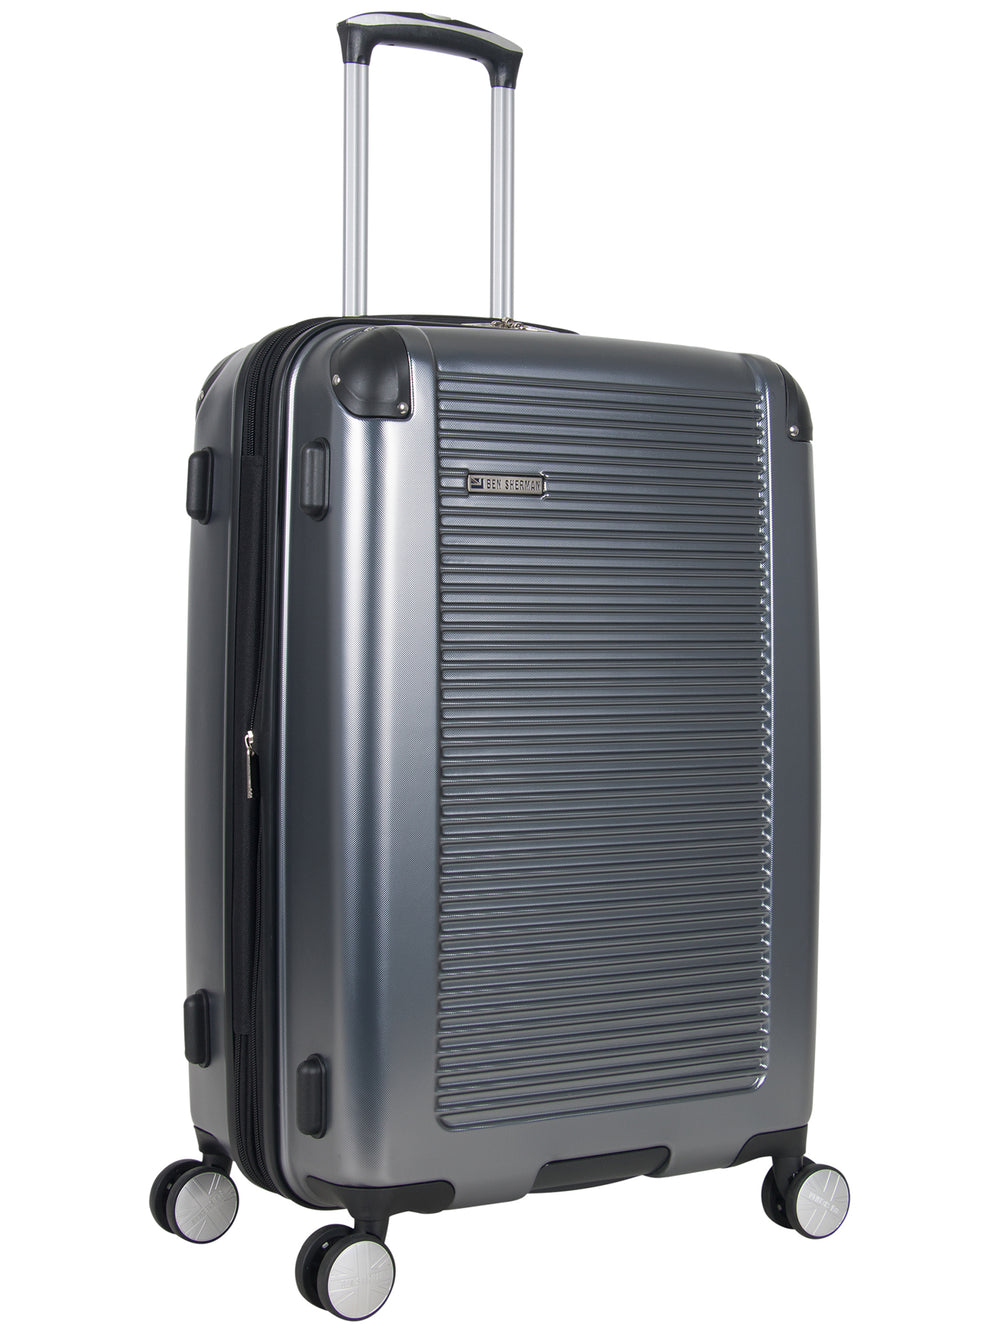 Norwich 3-Piece Expandable Hardside Luggage Collection - Gunmetal